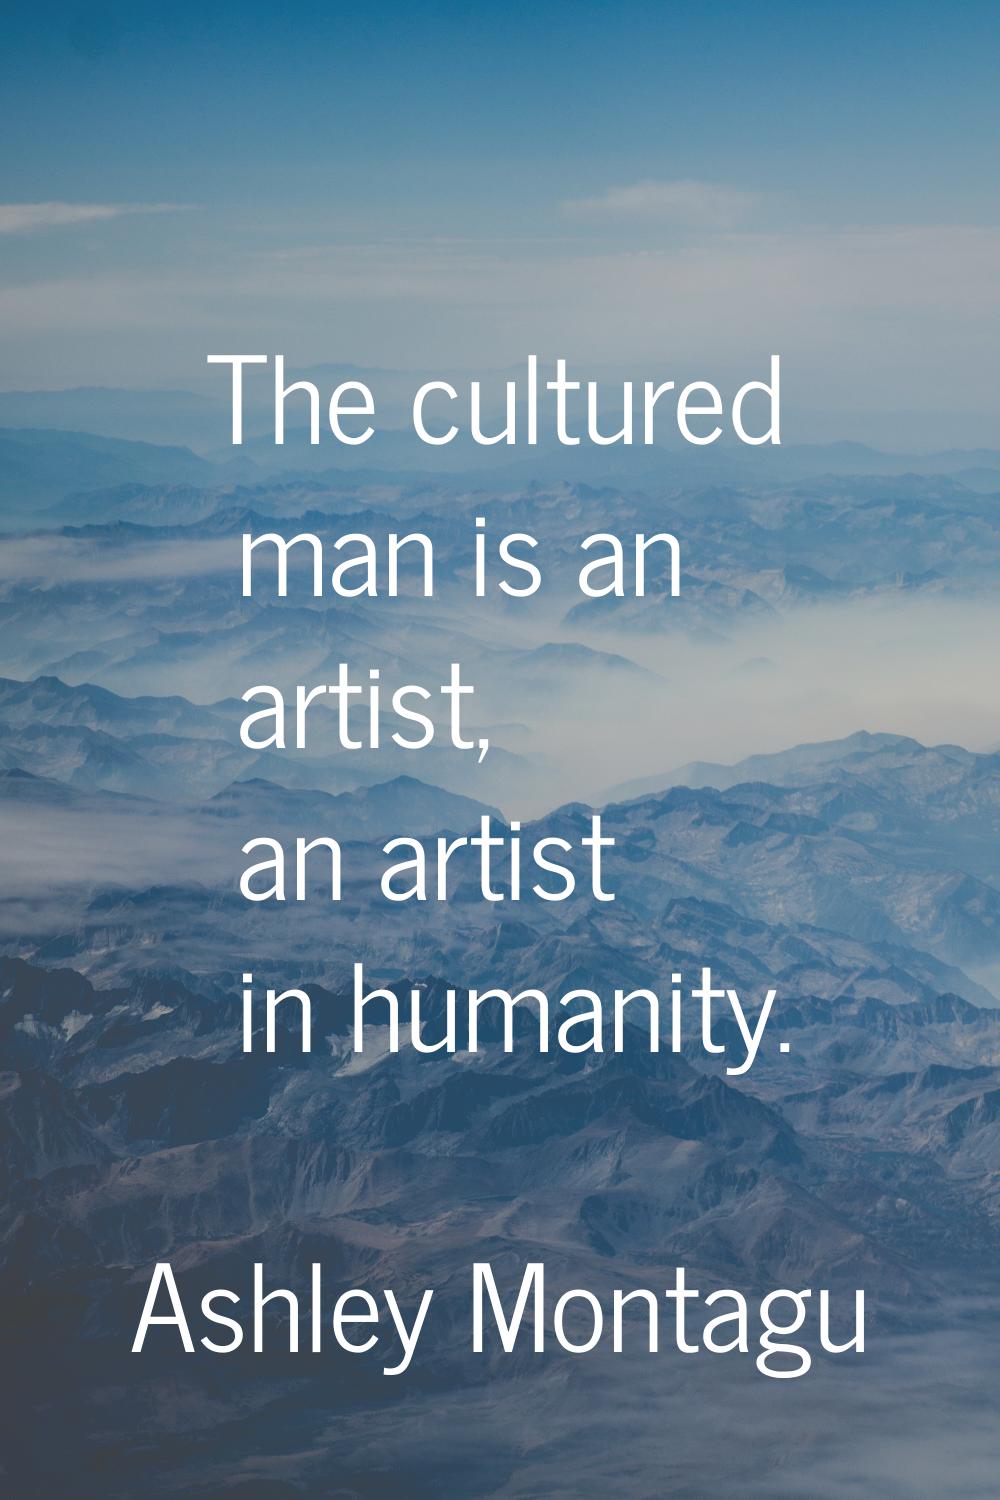 The cultured man is an artist, an artist in humanity.